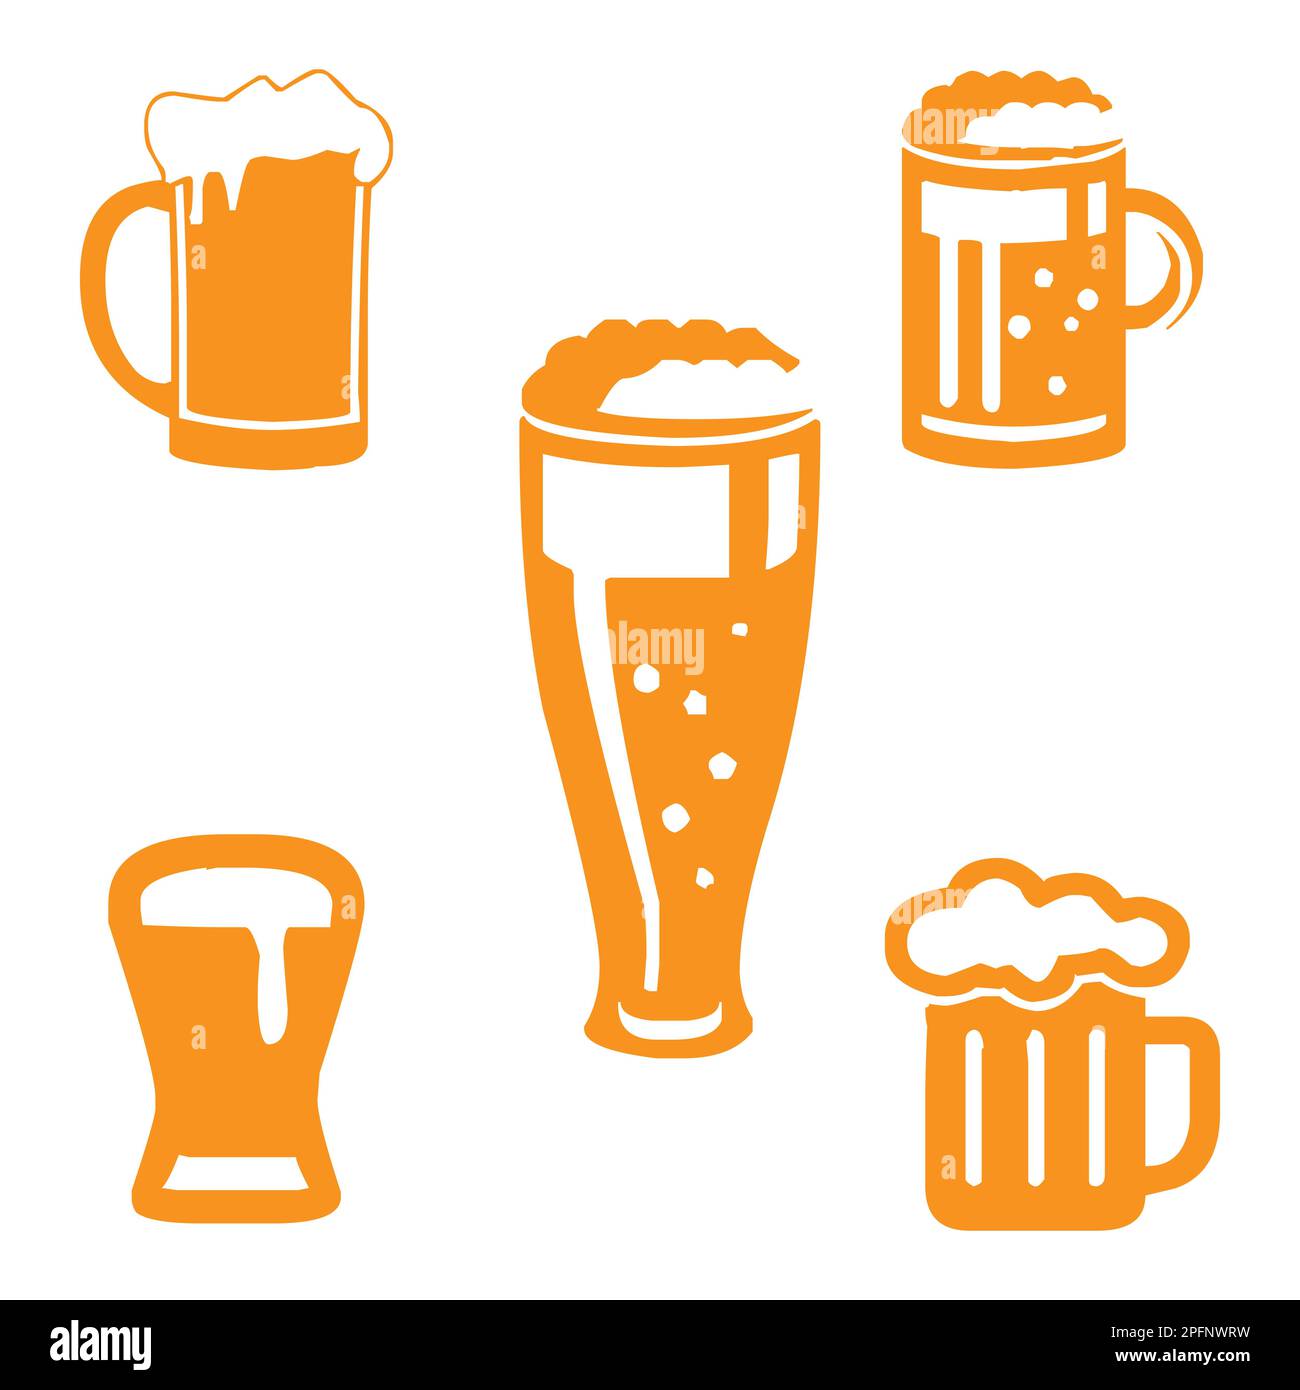 Colorful Cartoon Two Fancy Beer Glass Stock Vector - Illustration